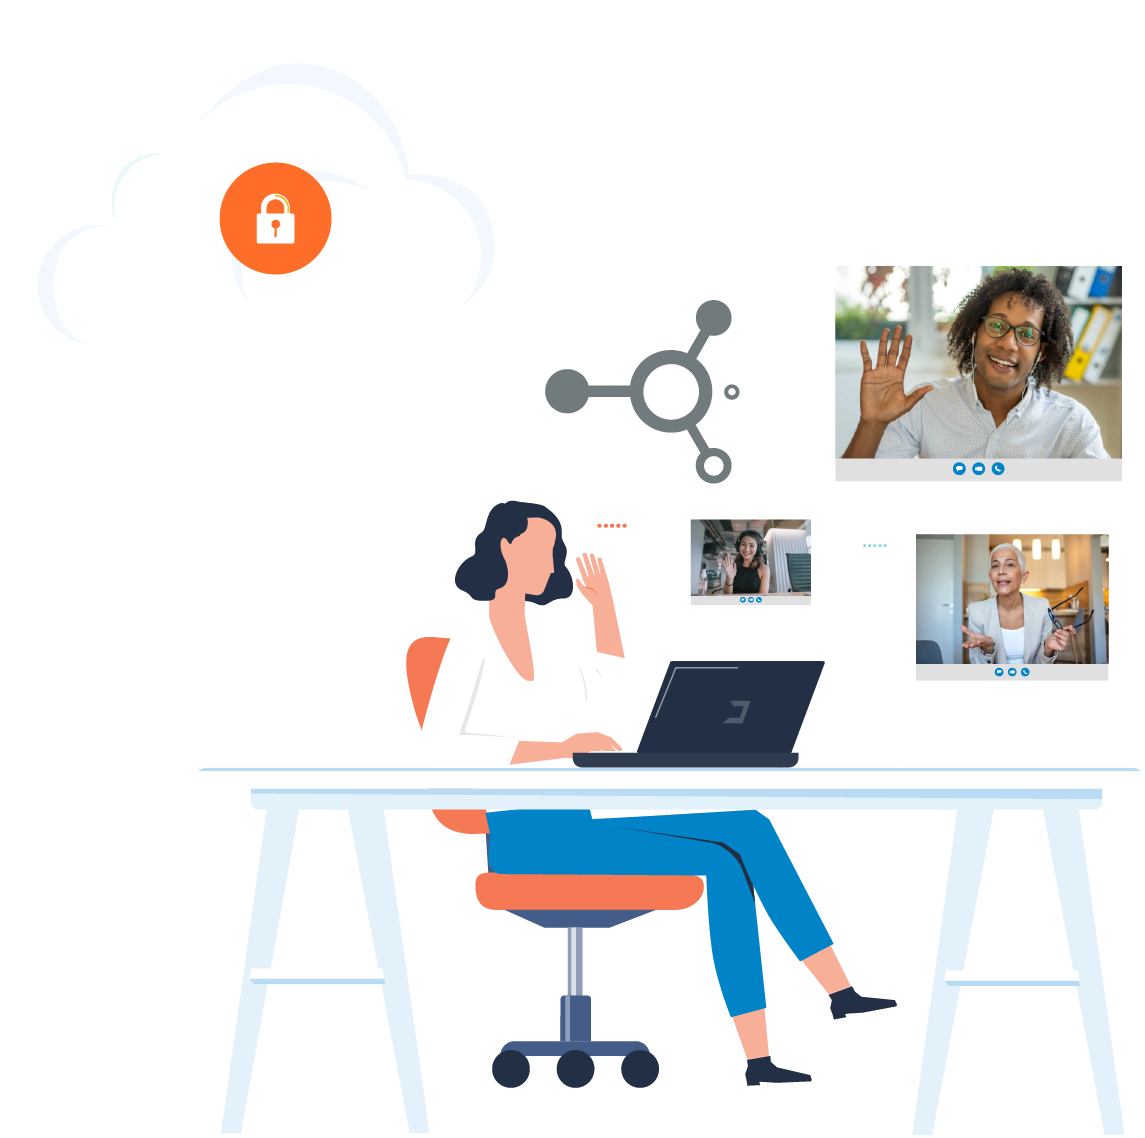 hybrid workers on webex, teams, zoom, google meet and gotomeeting need HAaaS to ensure the best audio, video and screen sharing experience.